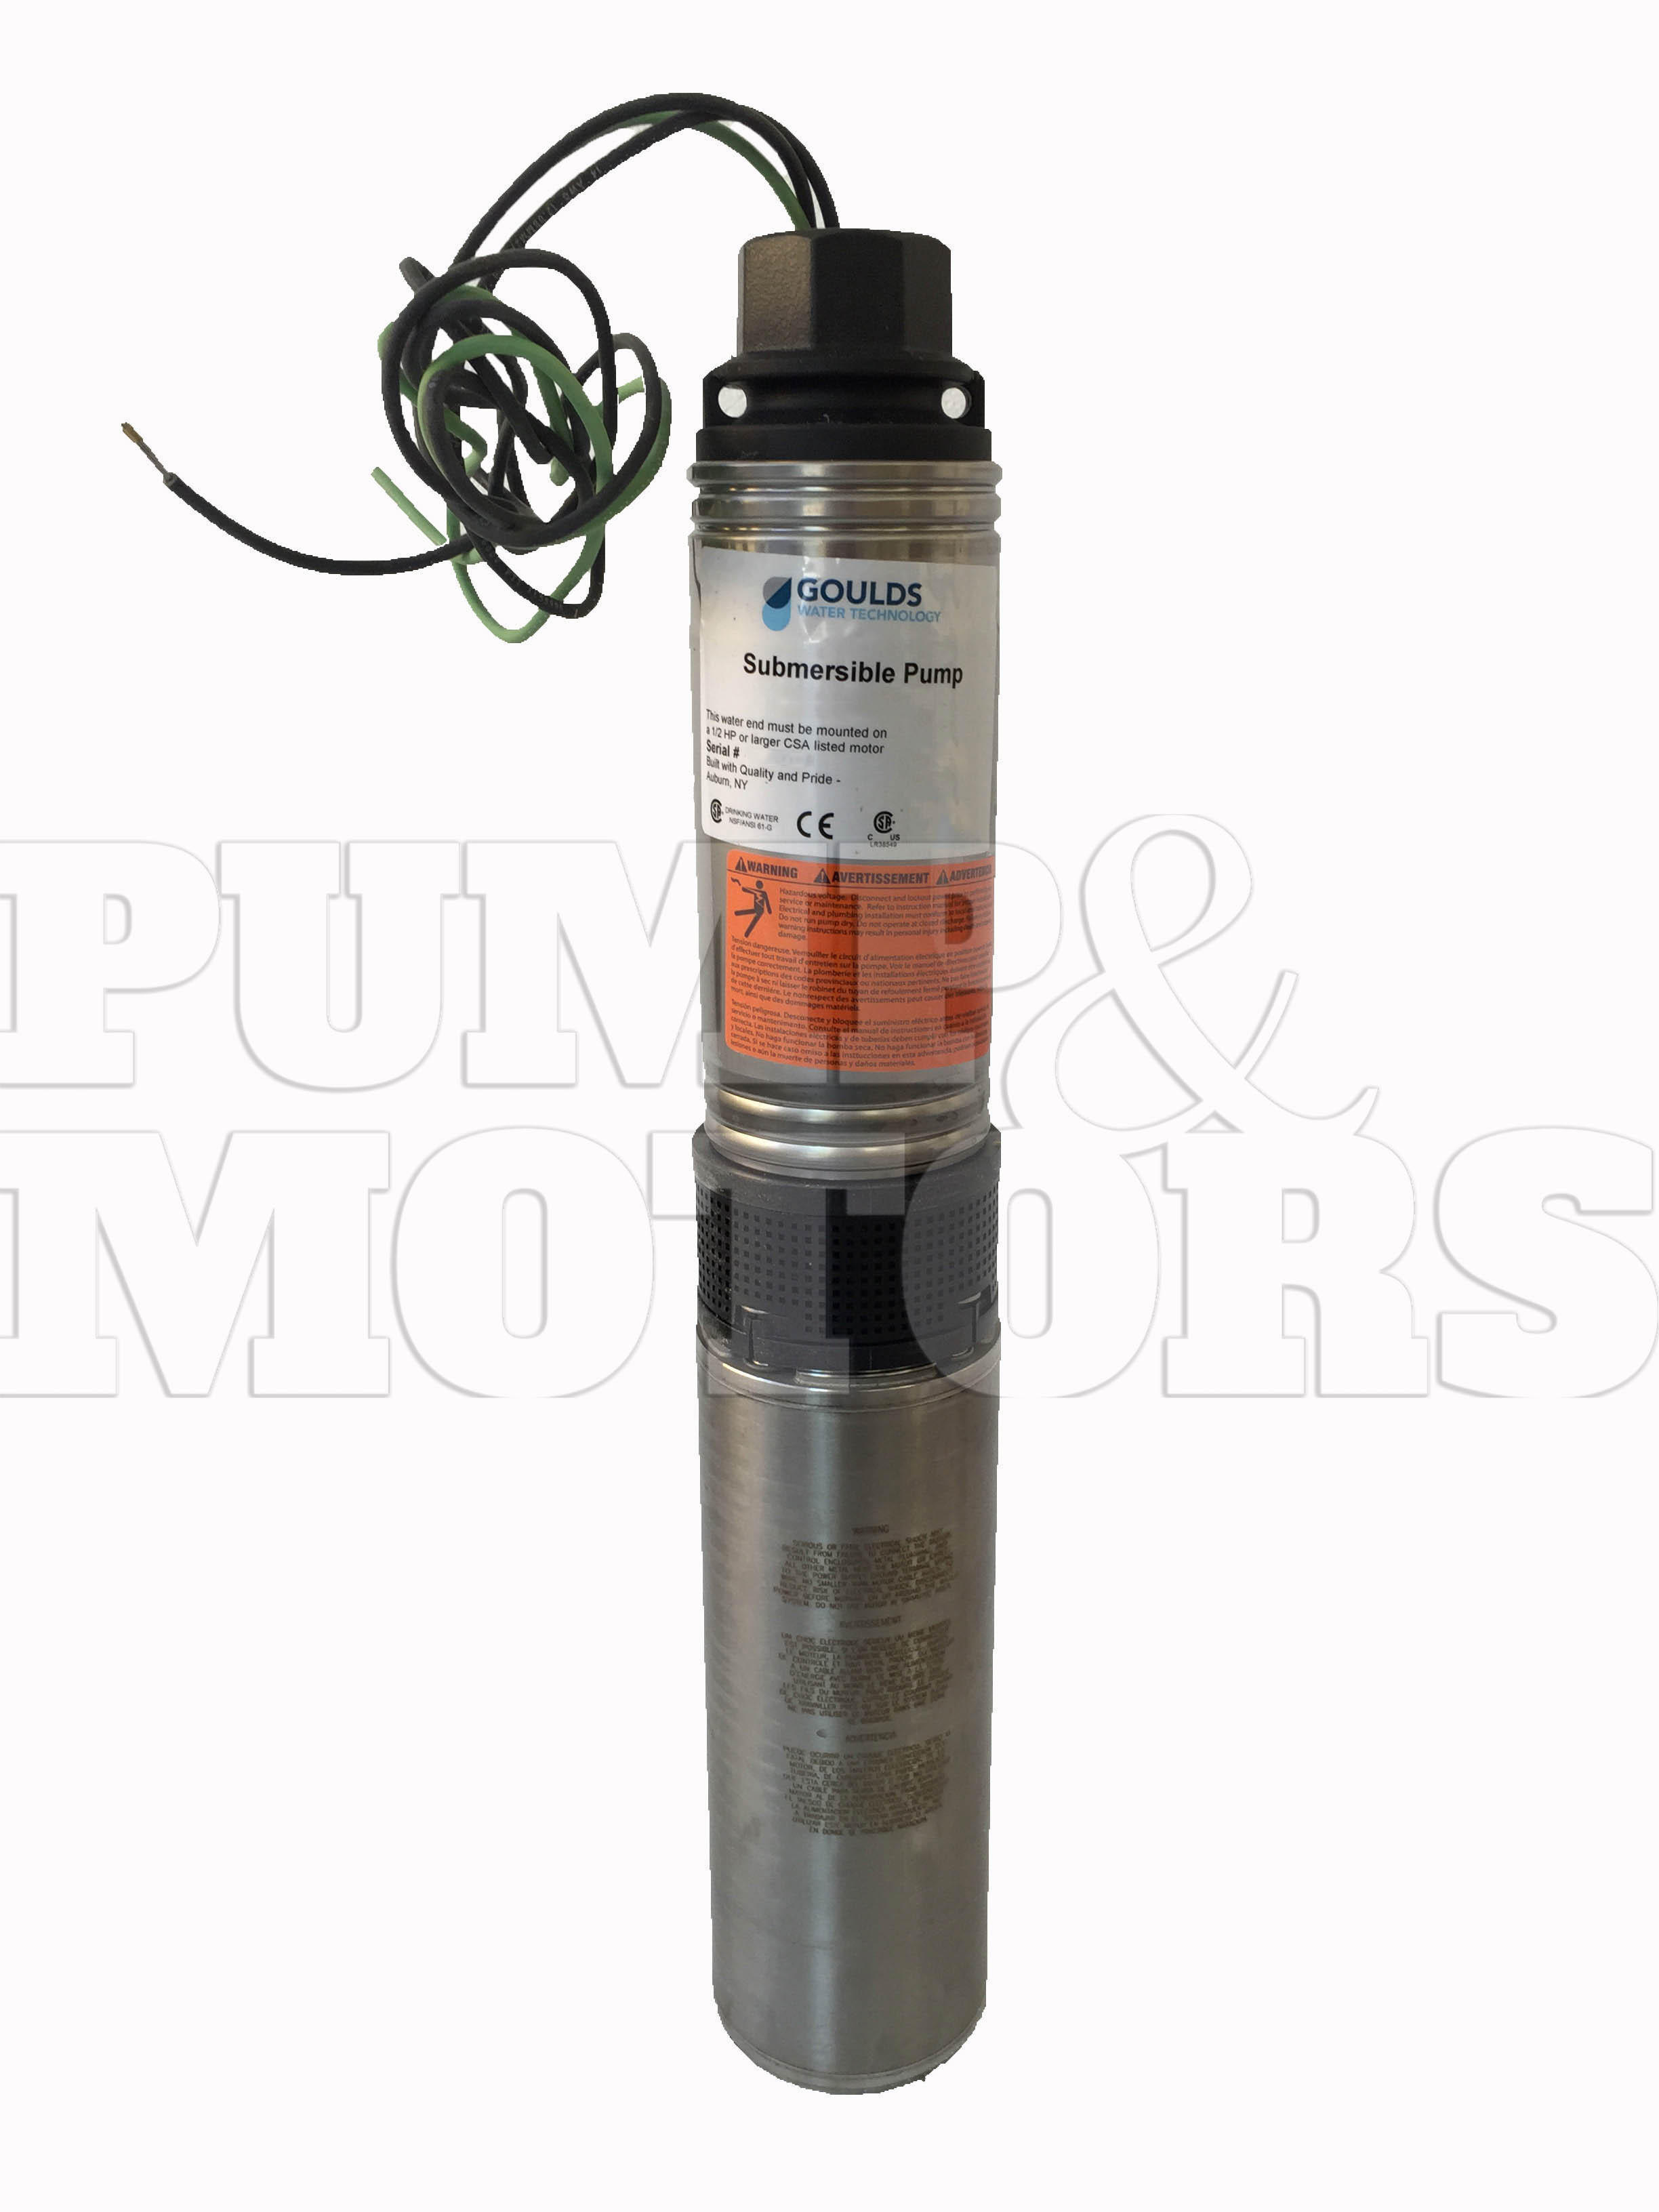 Goulds 5HS05421C 1/2 HP 115V 4" Submersible Water Well Pump 5GPM